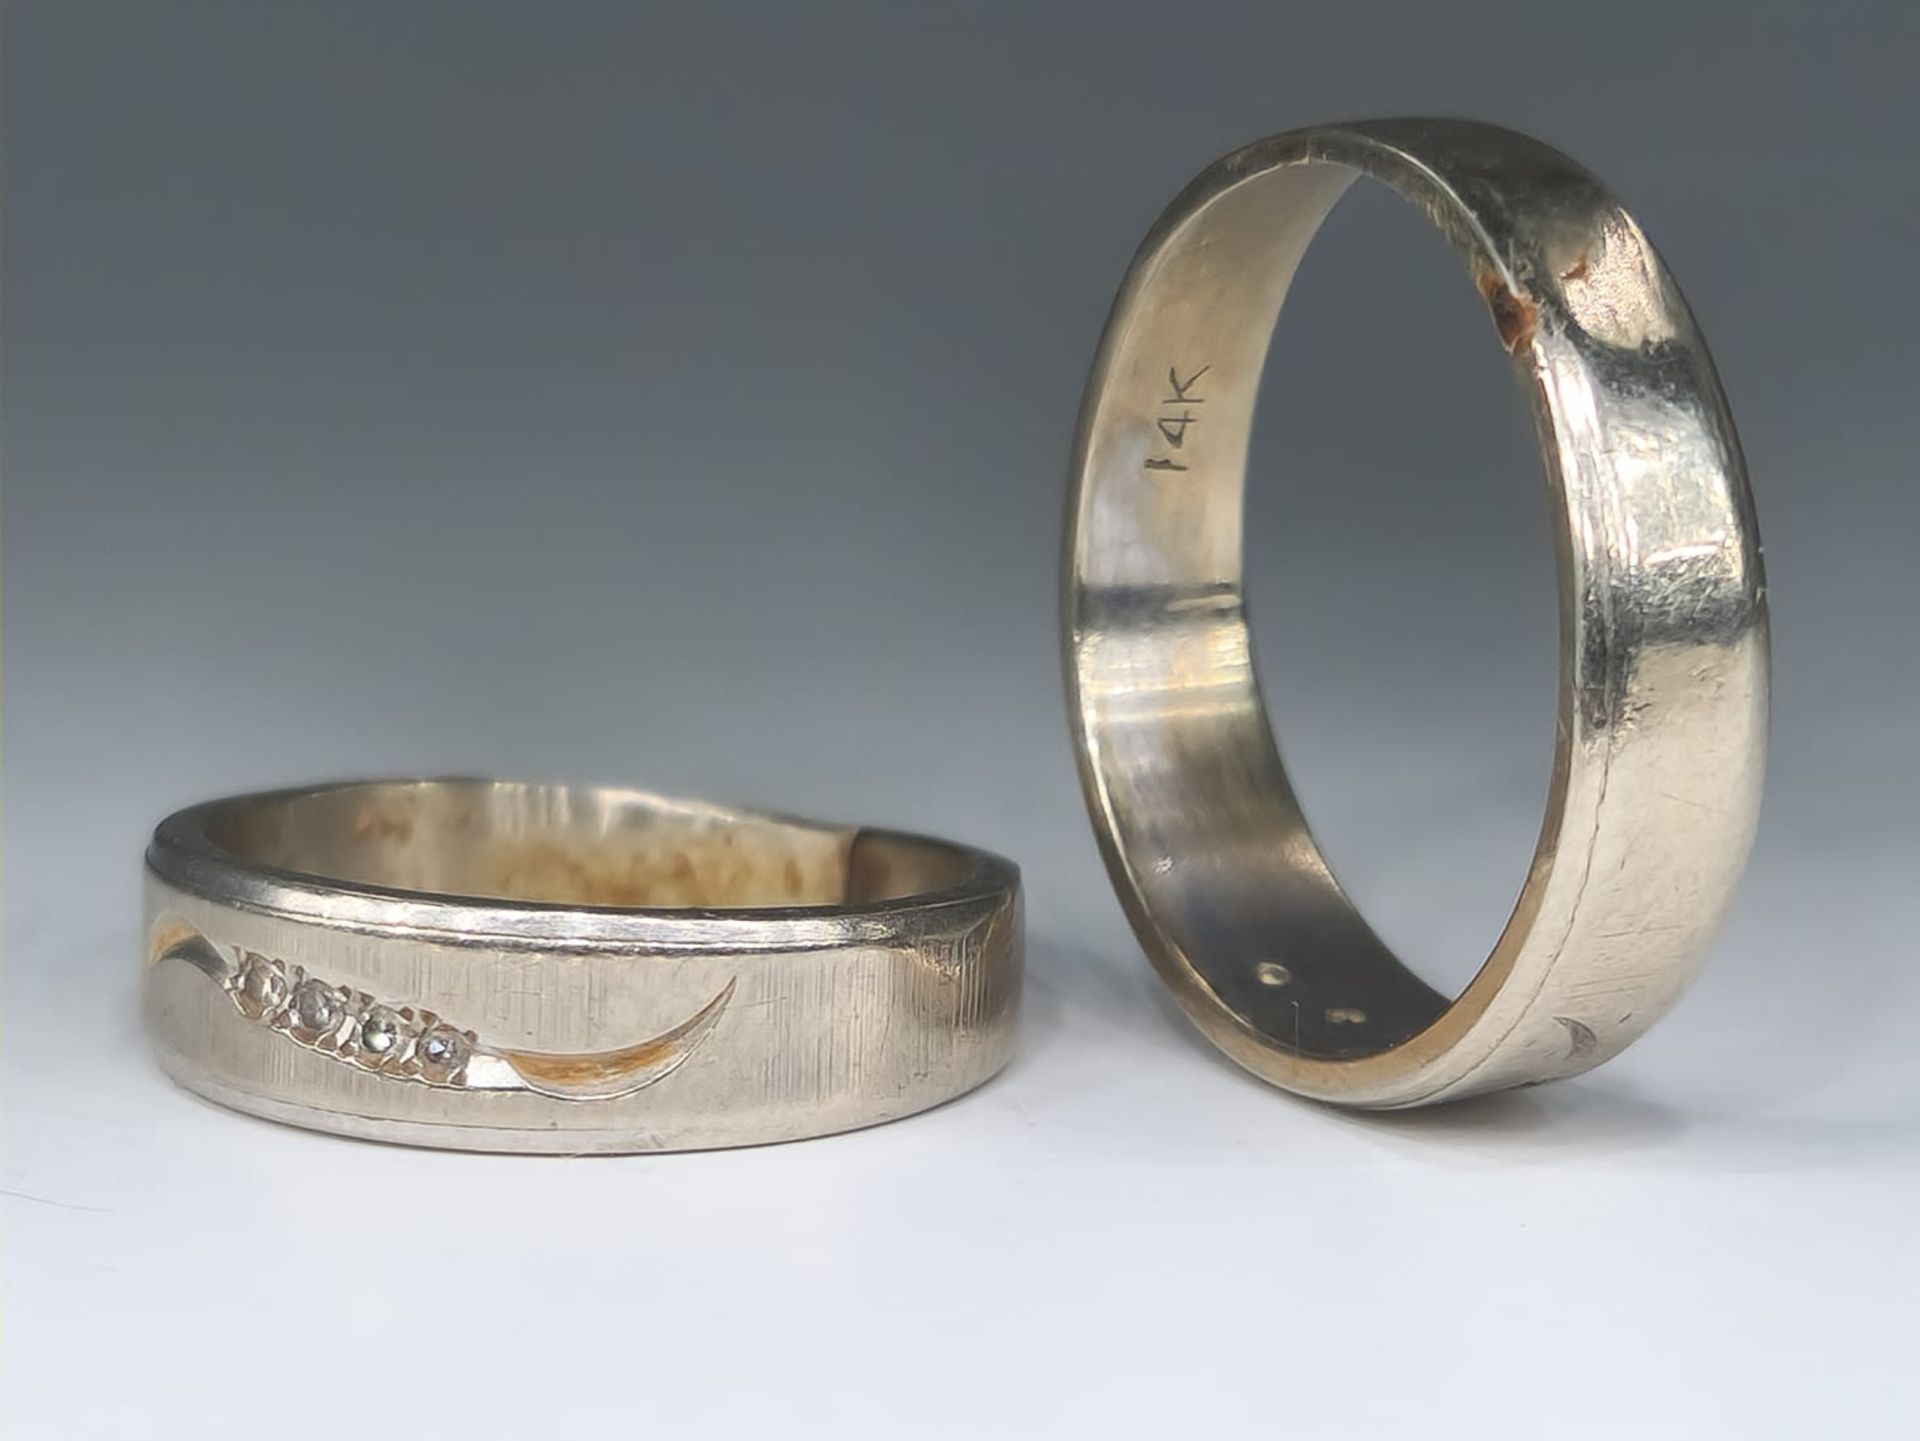 A set of 2 gold rings made of 14K white gold with small diamonds, with a total weight of - Bild 4 aus 6